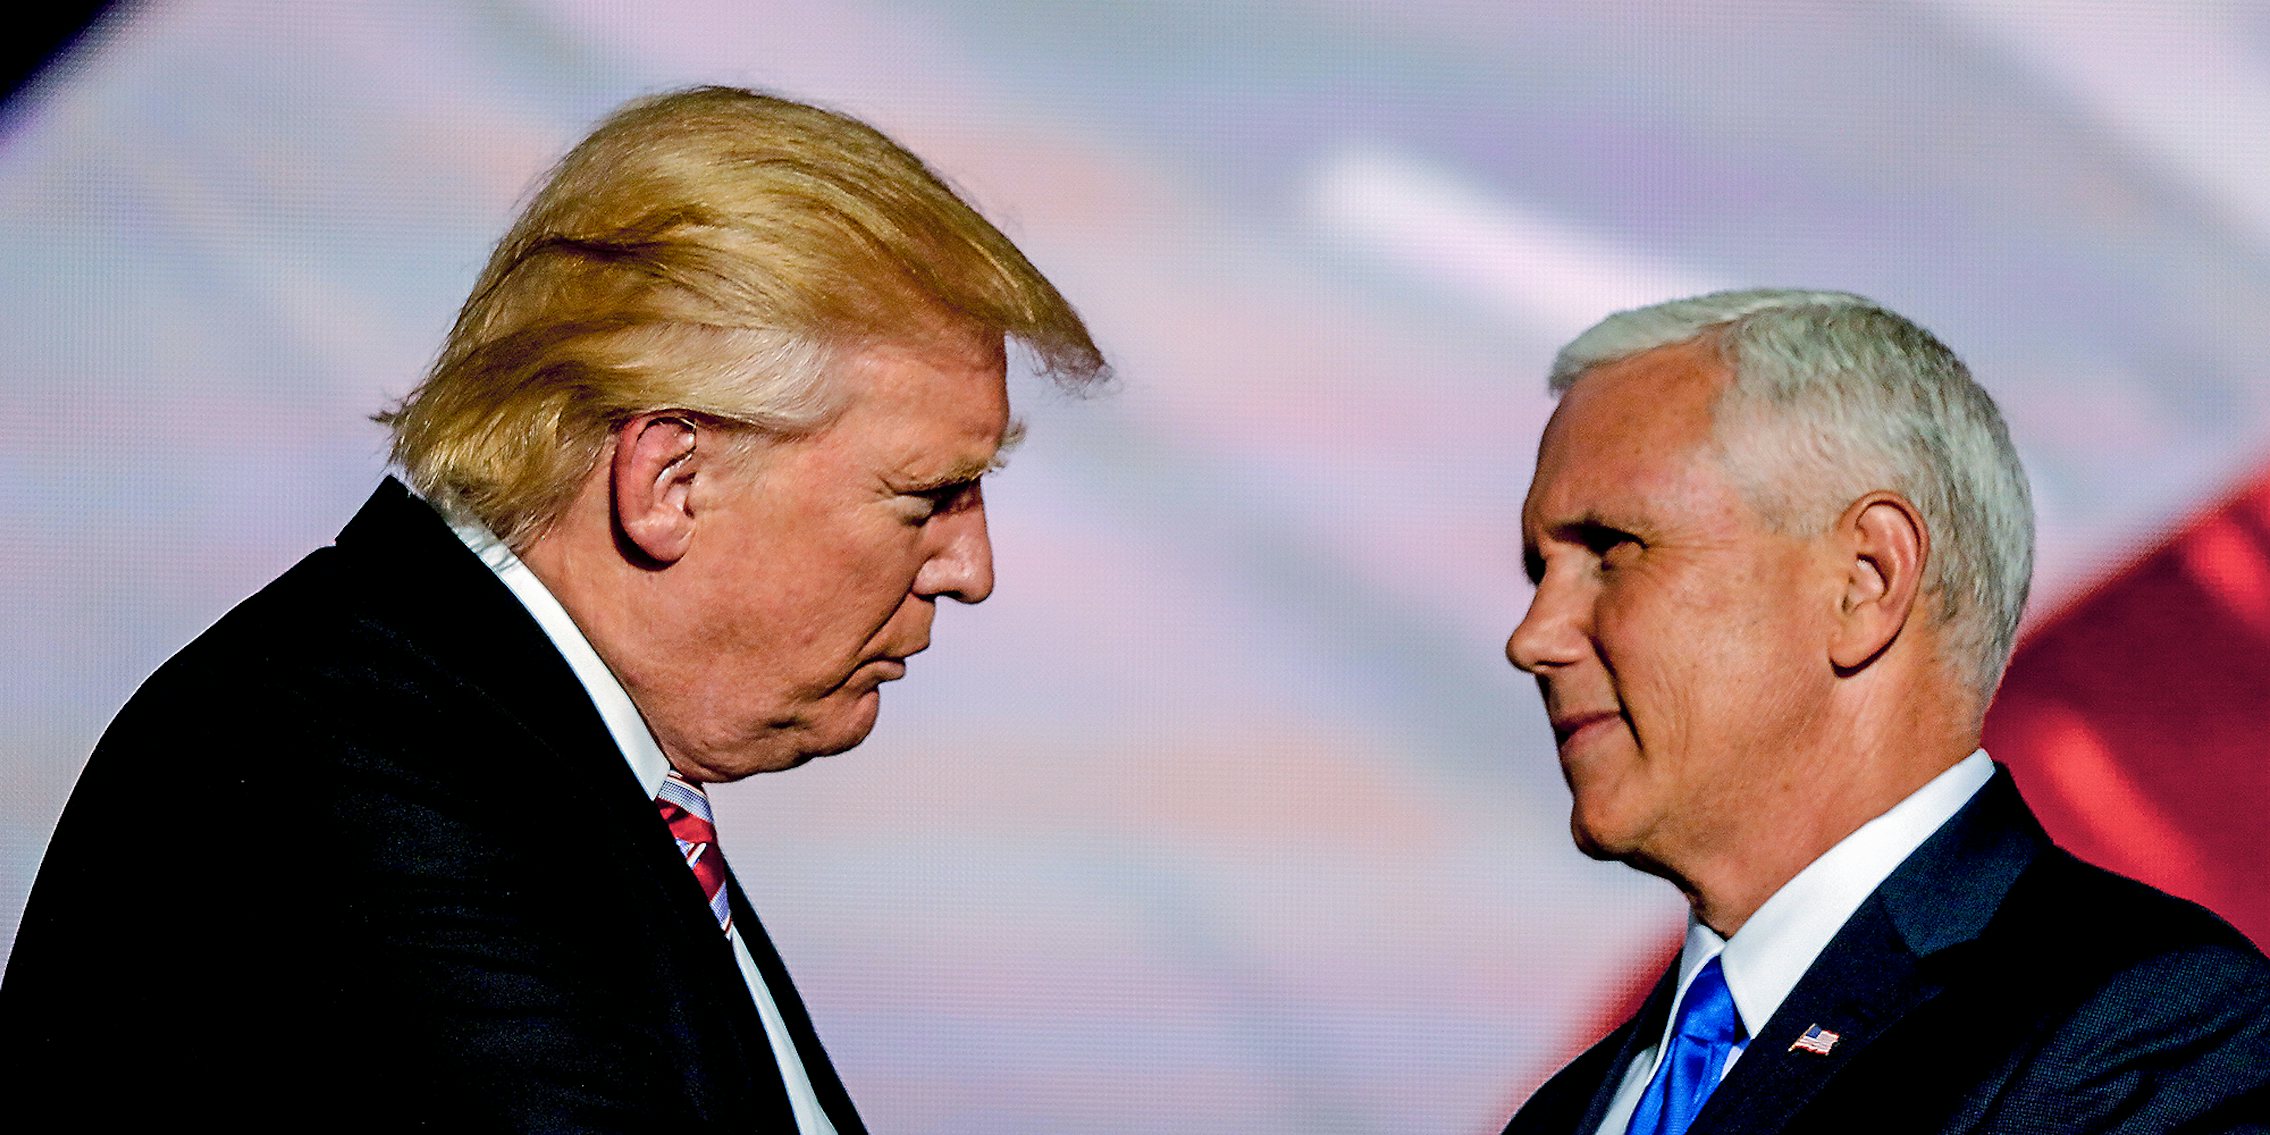 Donald Trump and Mike Pence looking at each other.